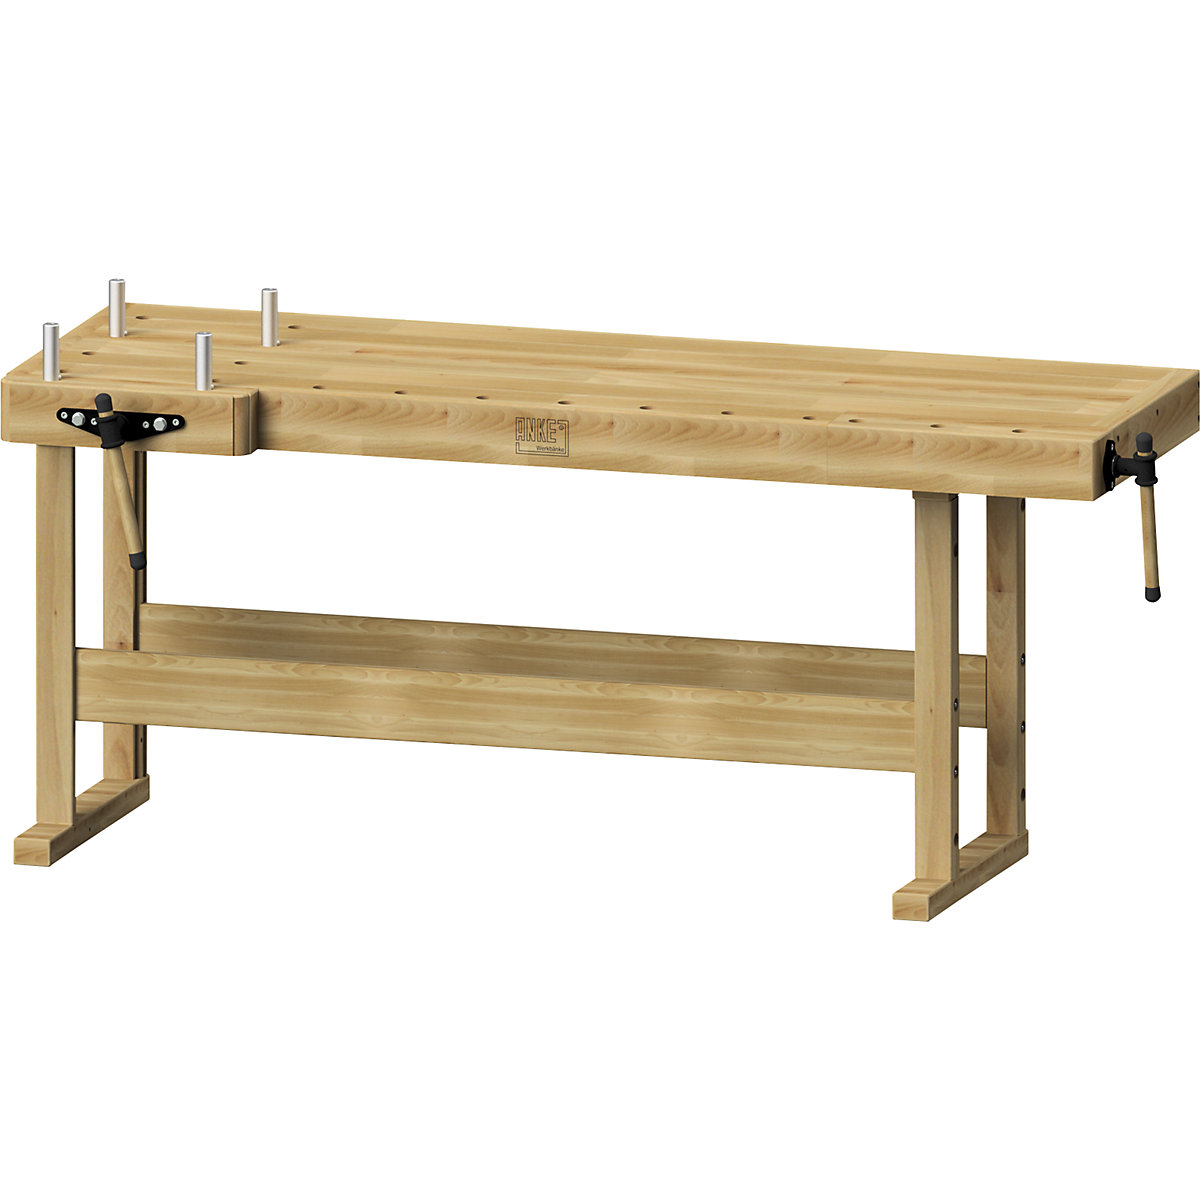 Professional planing bench – ANKE